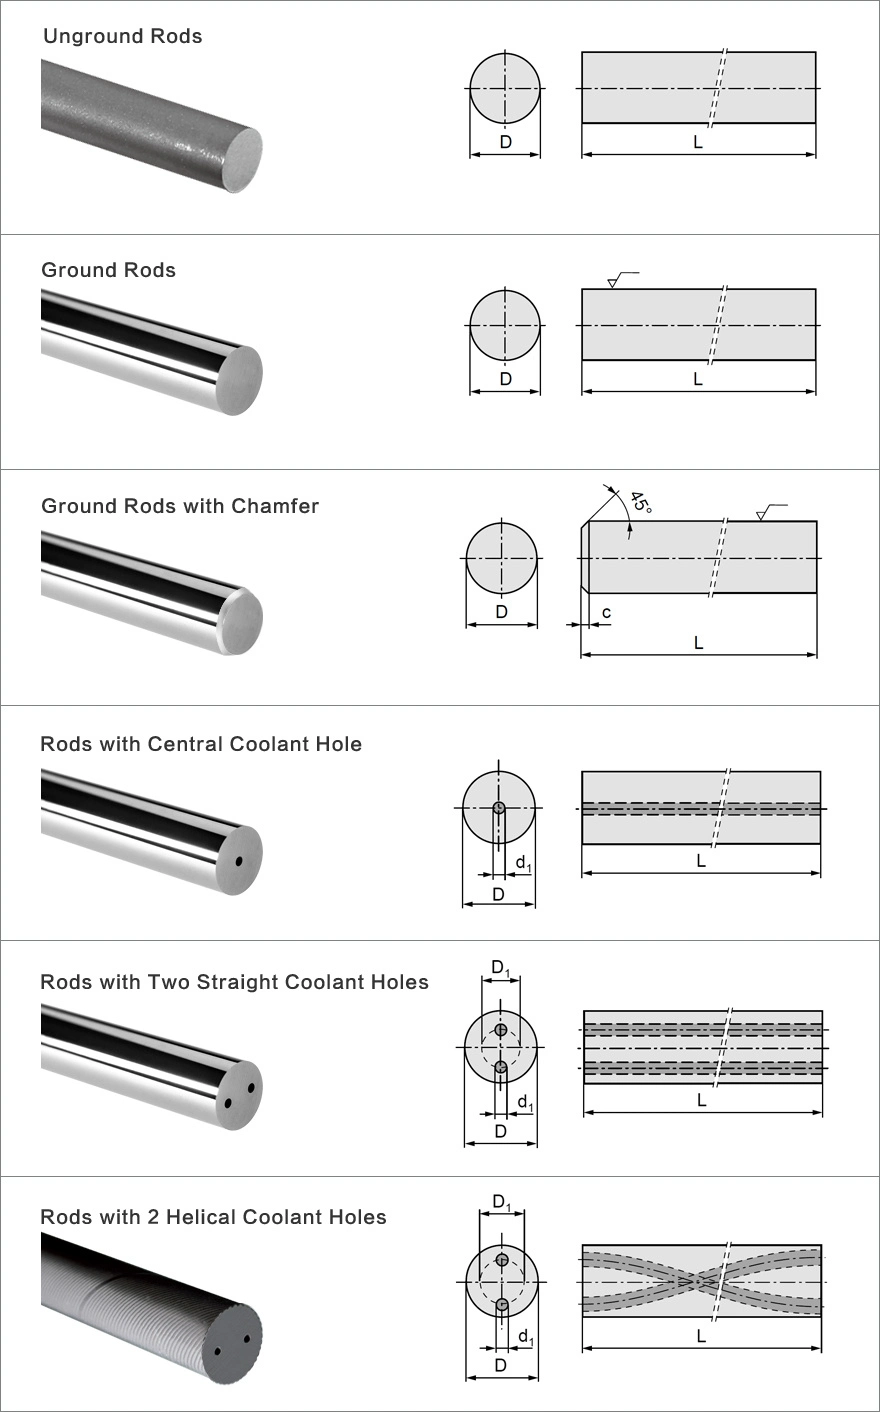 Helix Cemented Carbide Rods with Double Holes